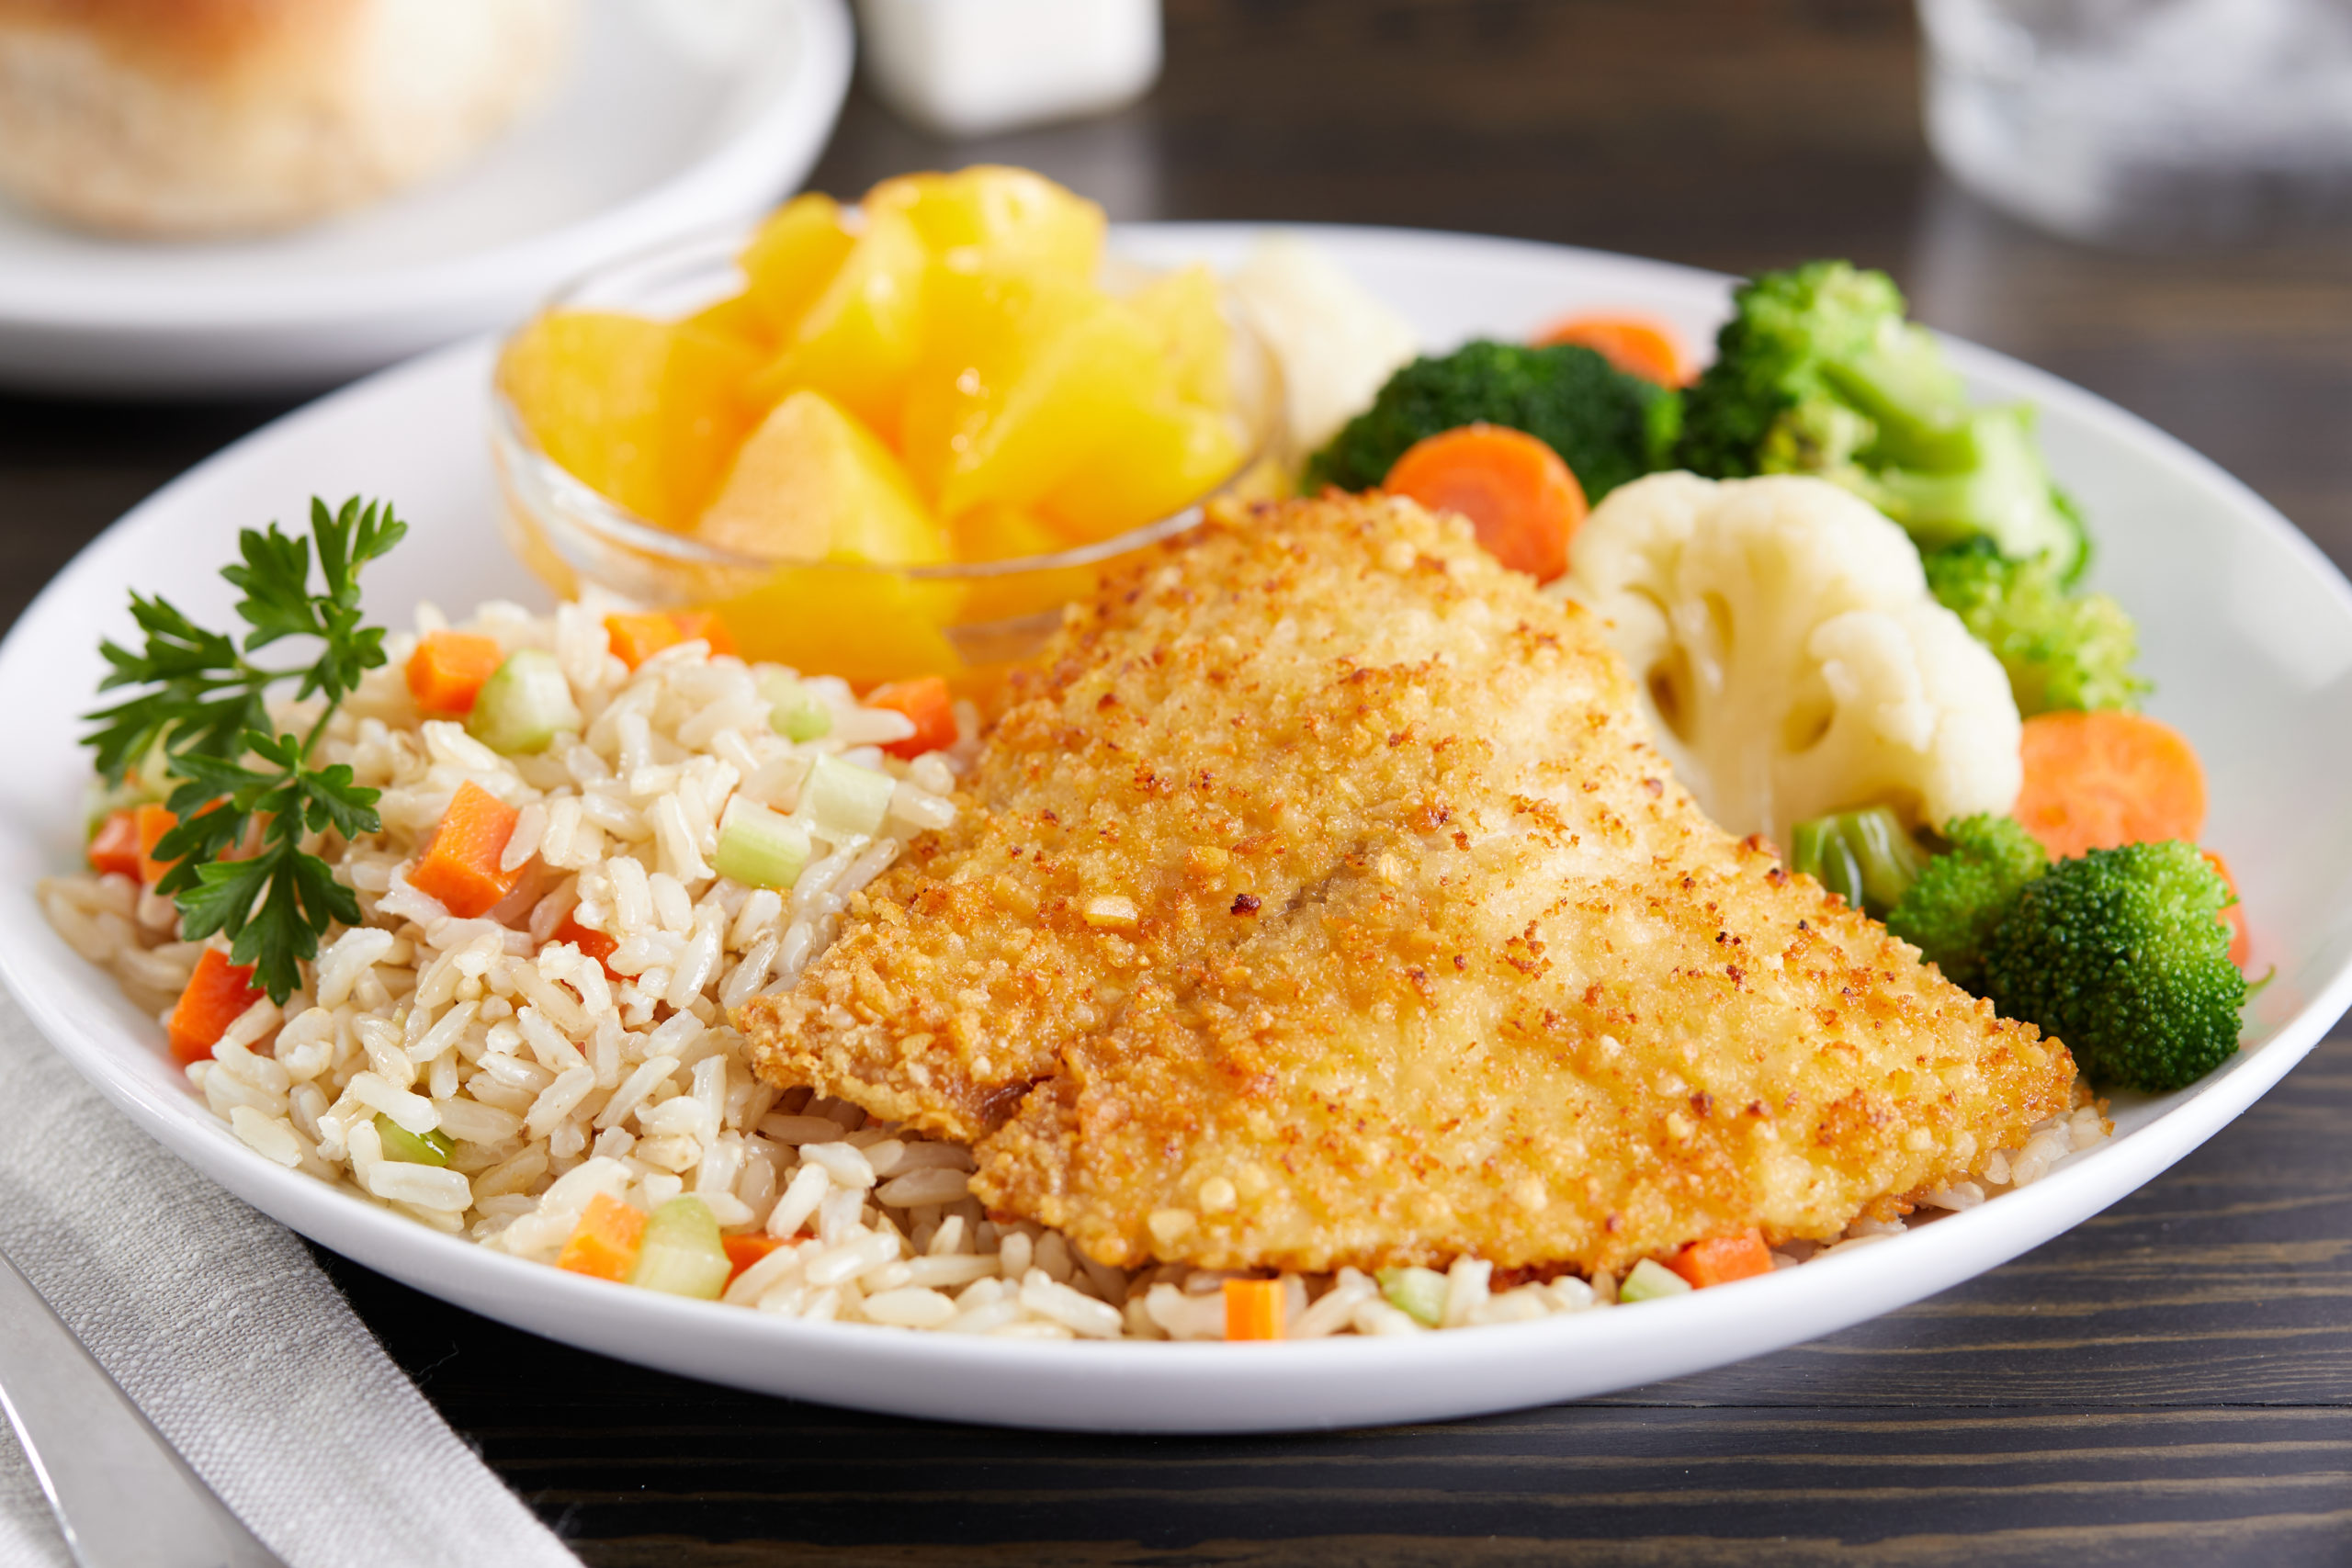 Fish parmesan meal with fruit and veggies